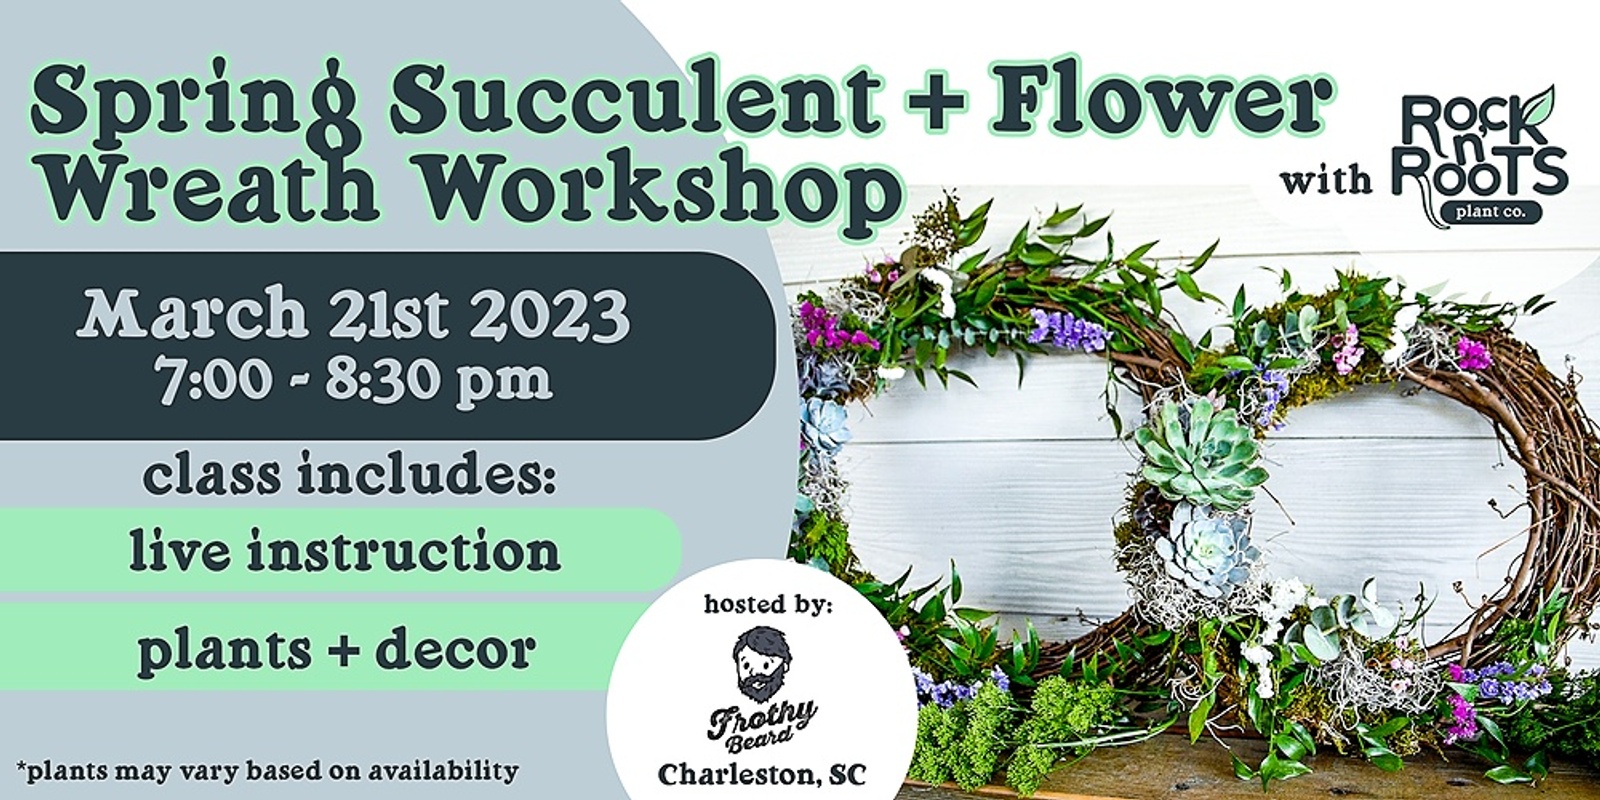 Banner image for (SOLD OUT) Spring Succulent + Flower Wreath Workshop at Frothy Beard Brewing (Charleston, SC)